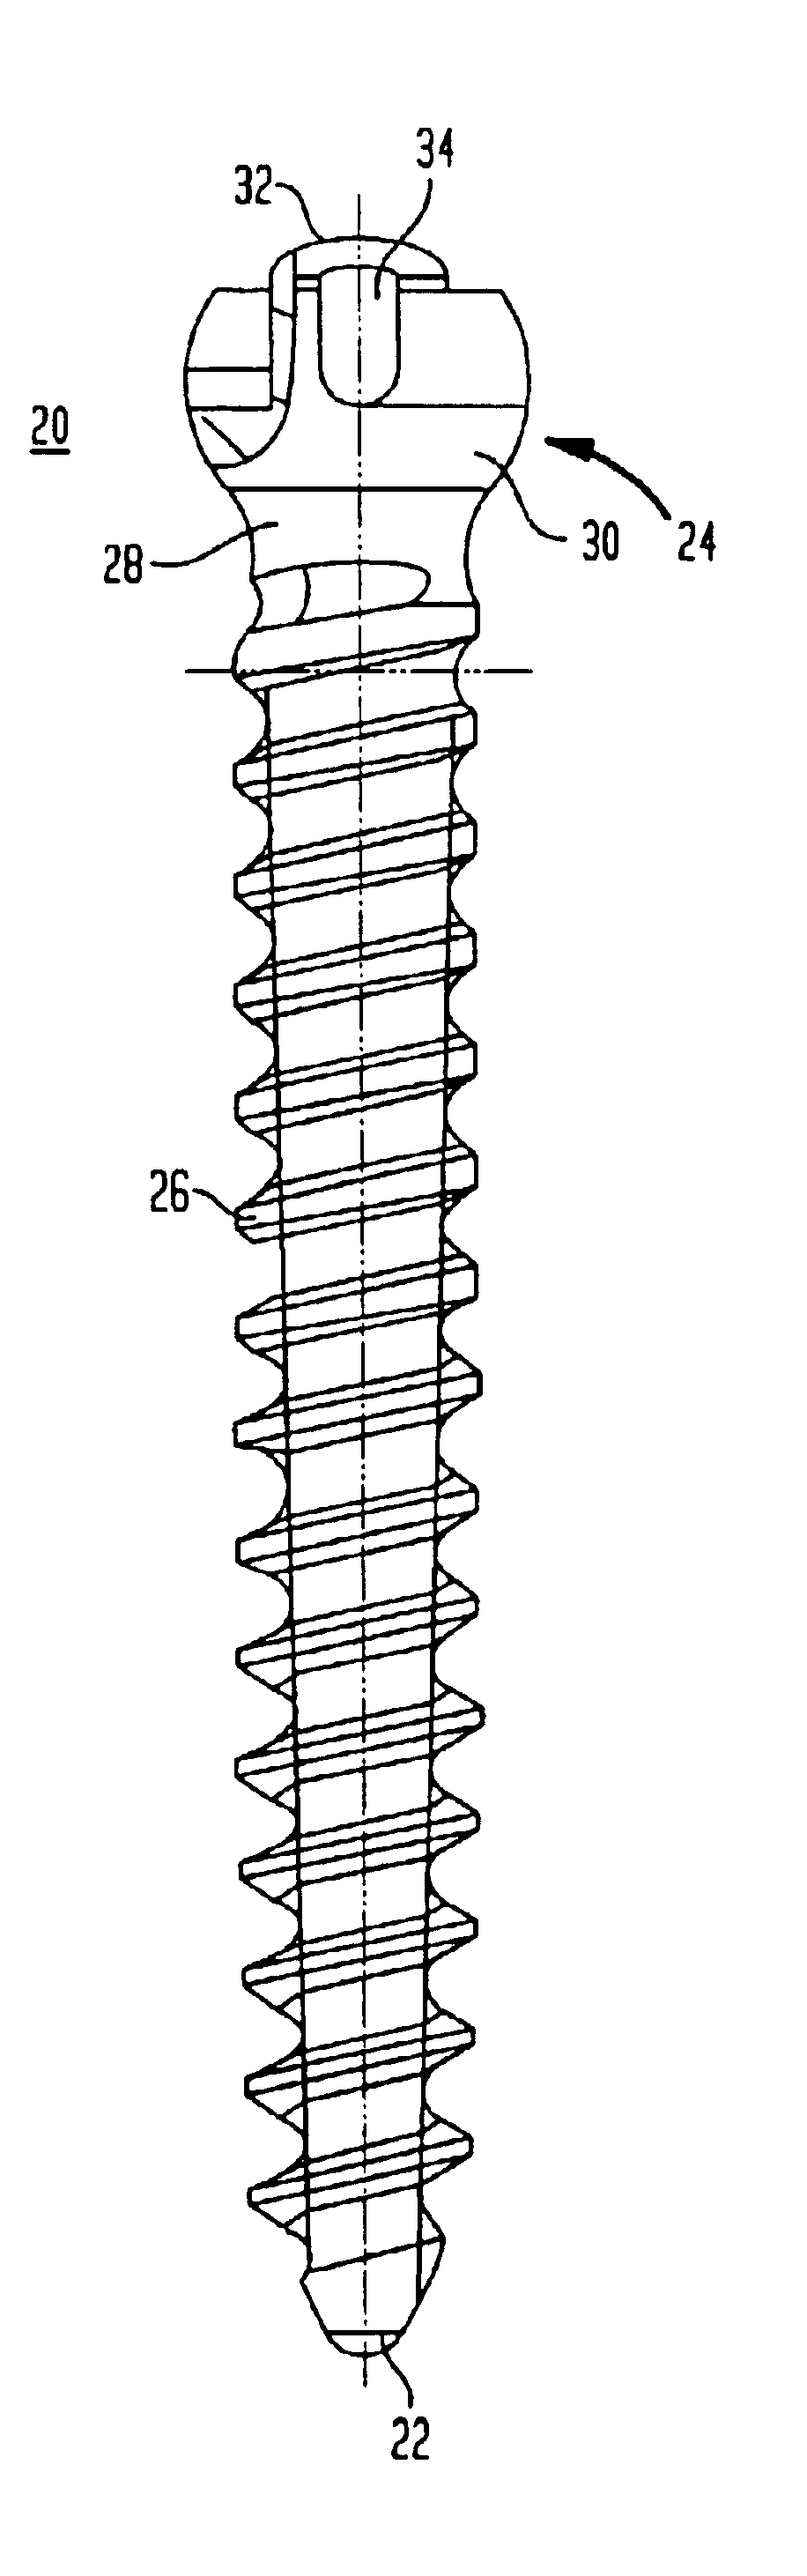 Pedicle screw assembly and methods therefor